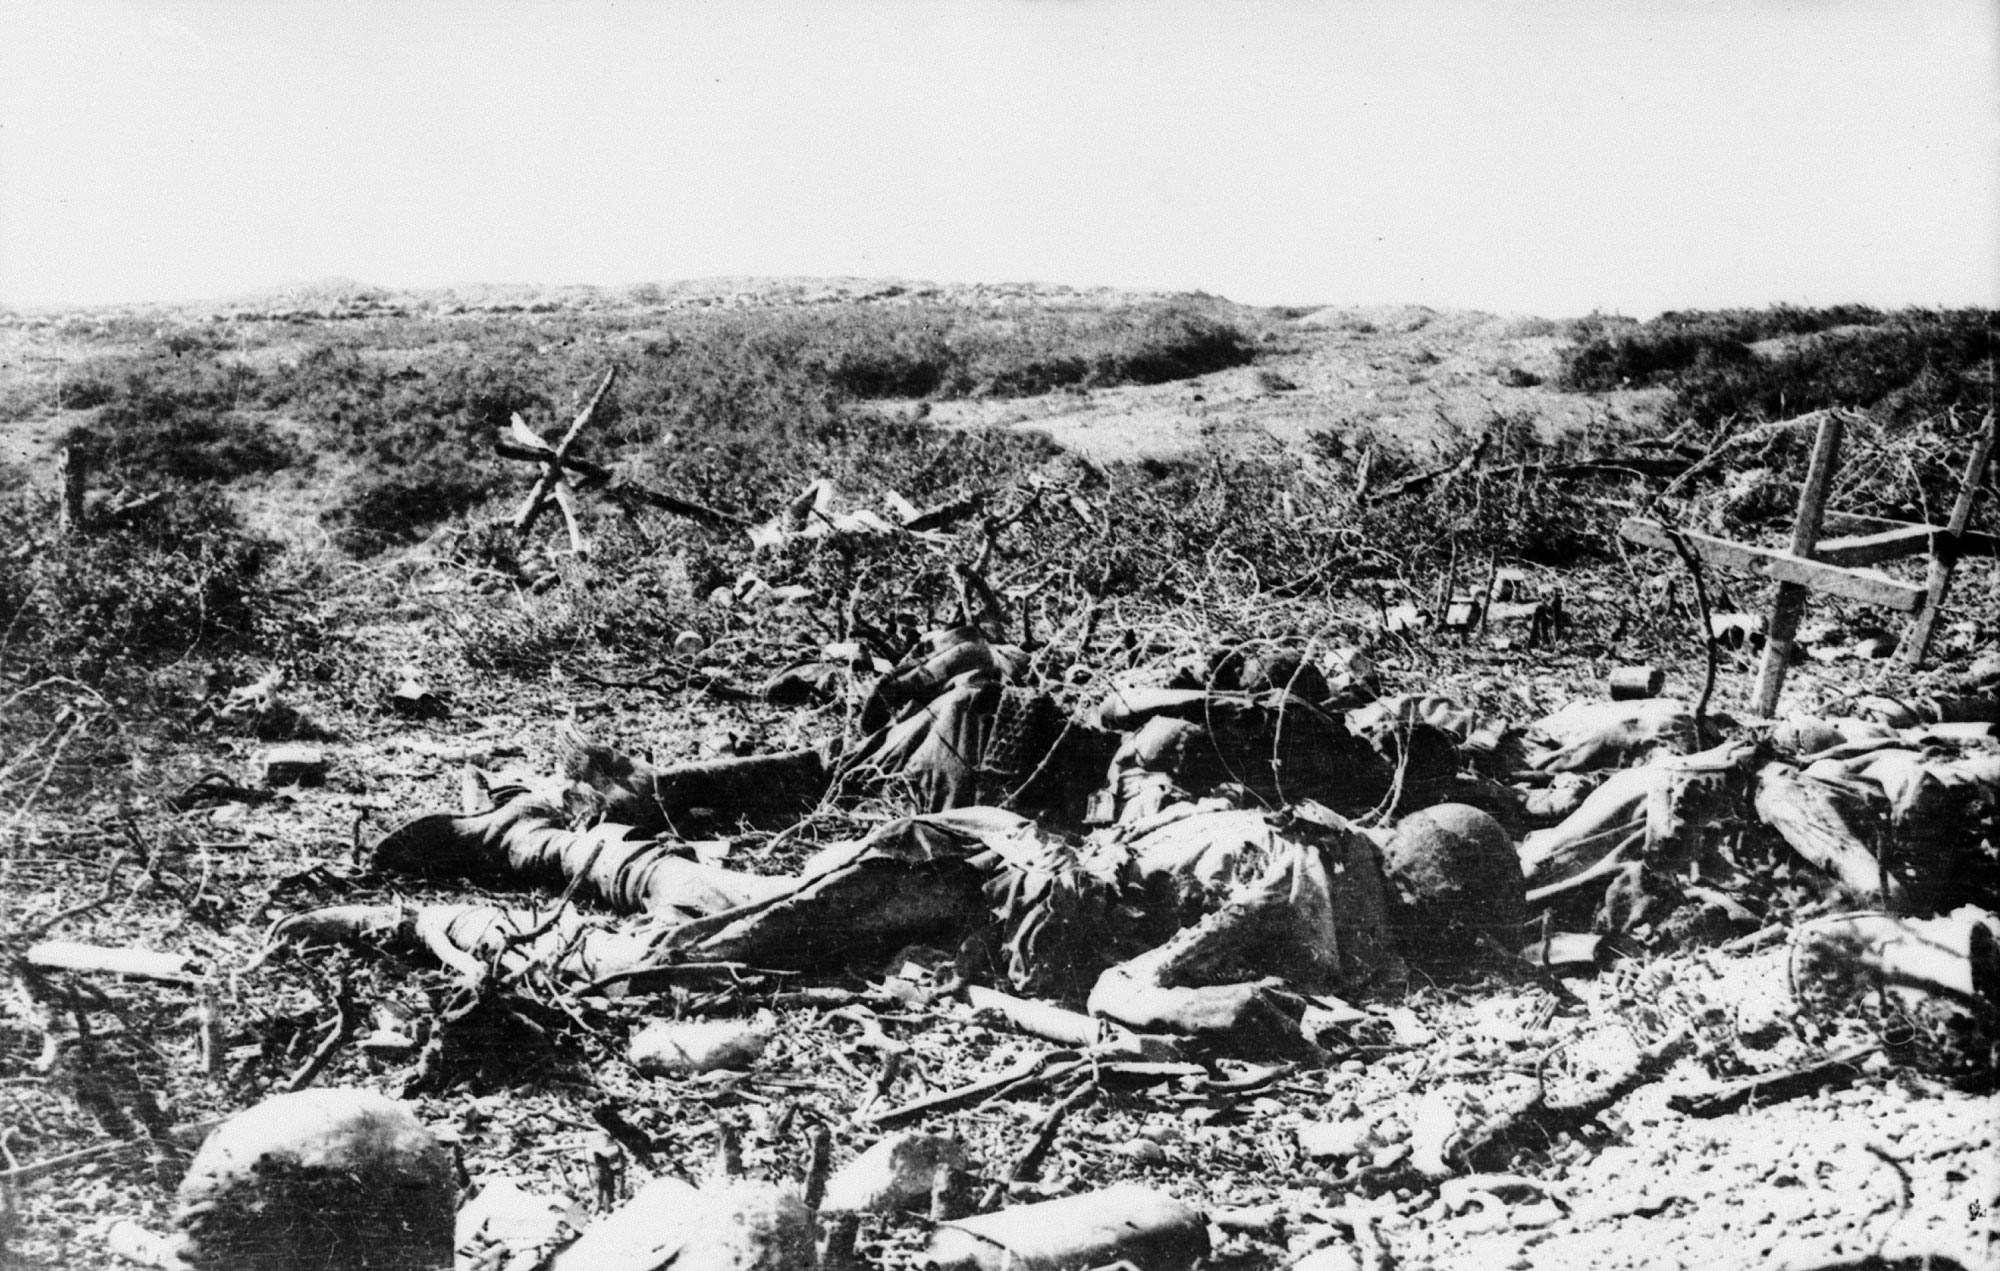 The aftermath of the Battle of Lone Pine, Gallipoli, 1915.